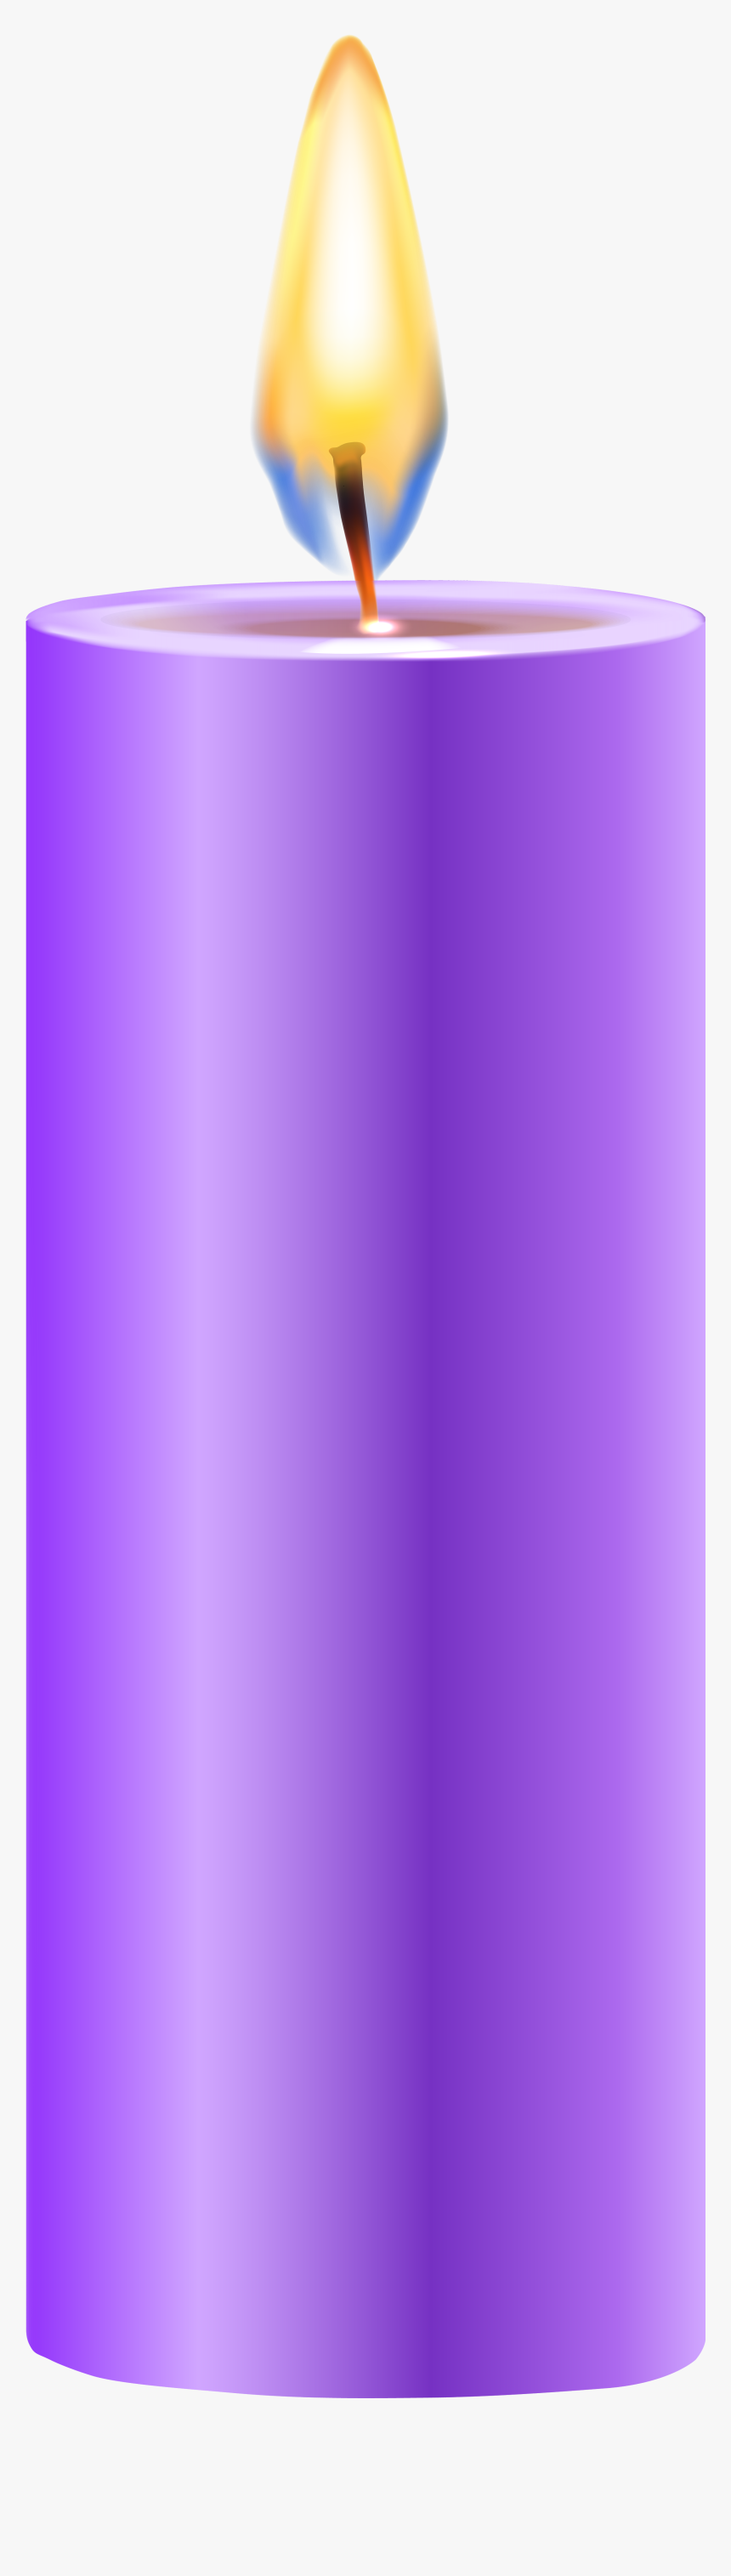 Purple Candle Clipart, HD Png Download, Free Download